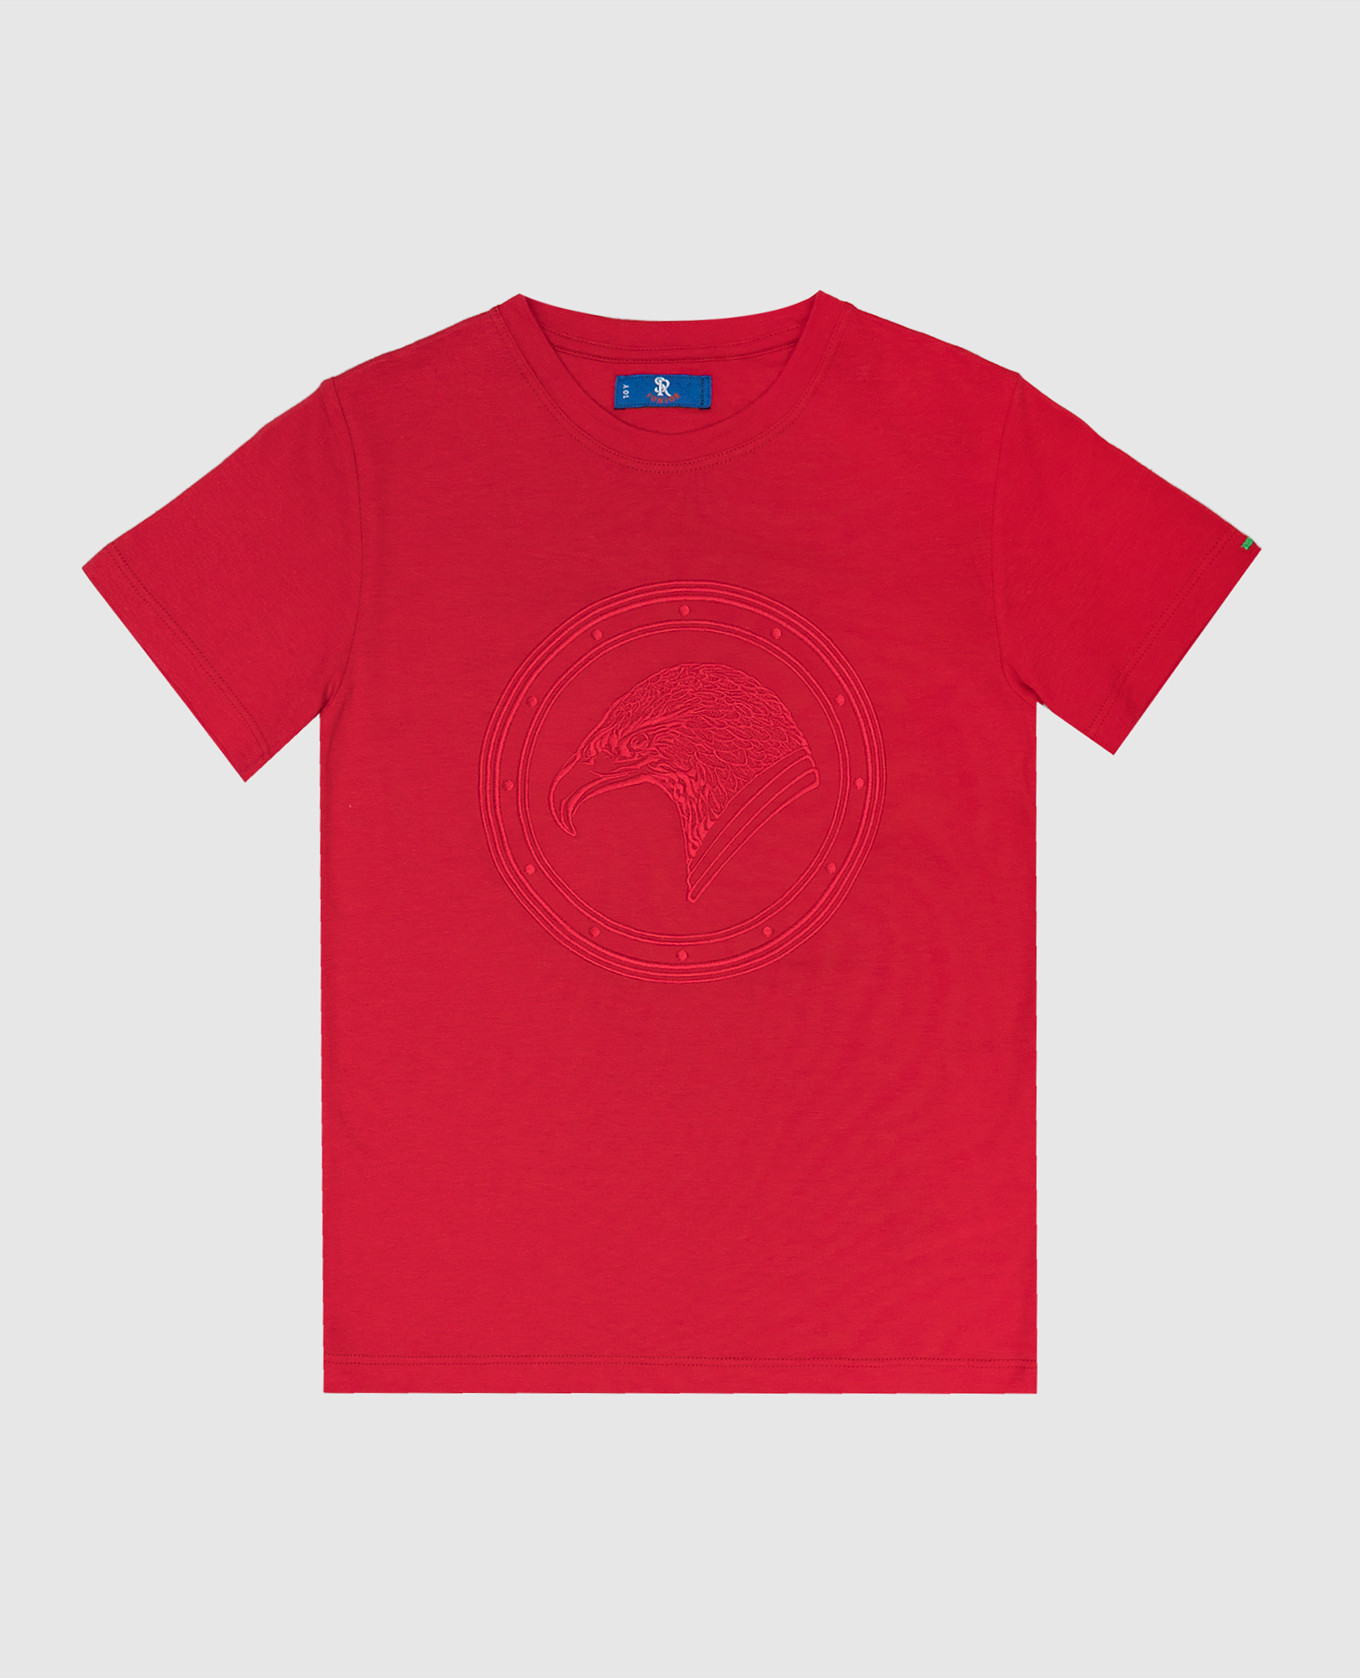 Children's red t-shirt with logo embroidery